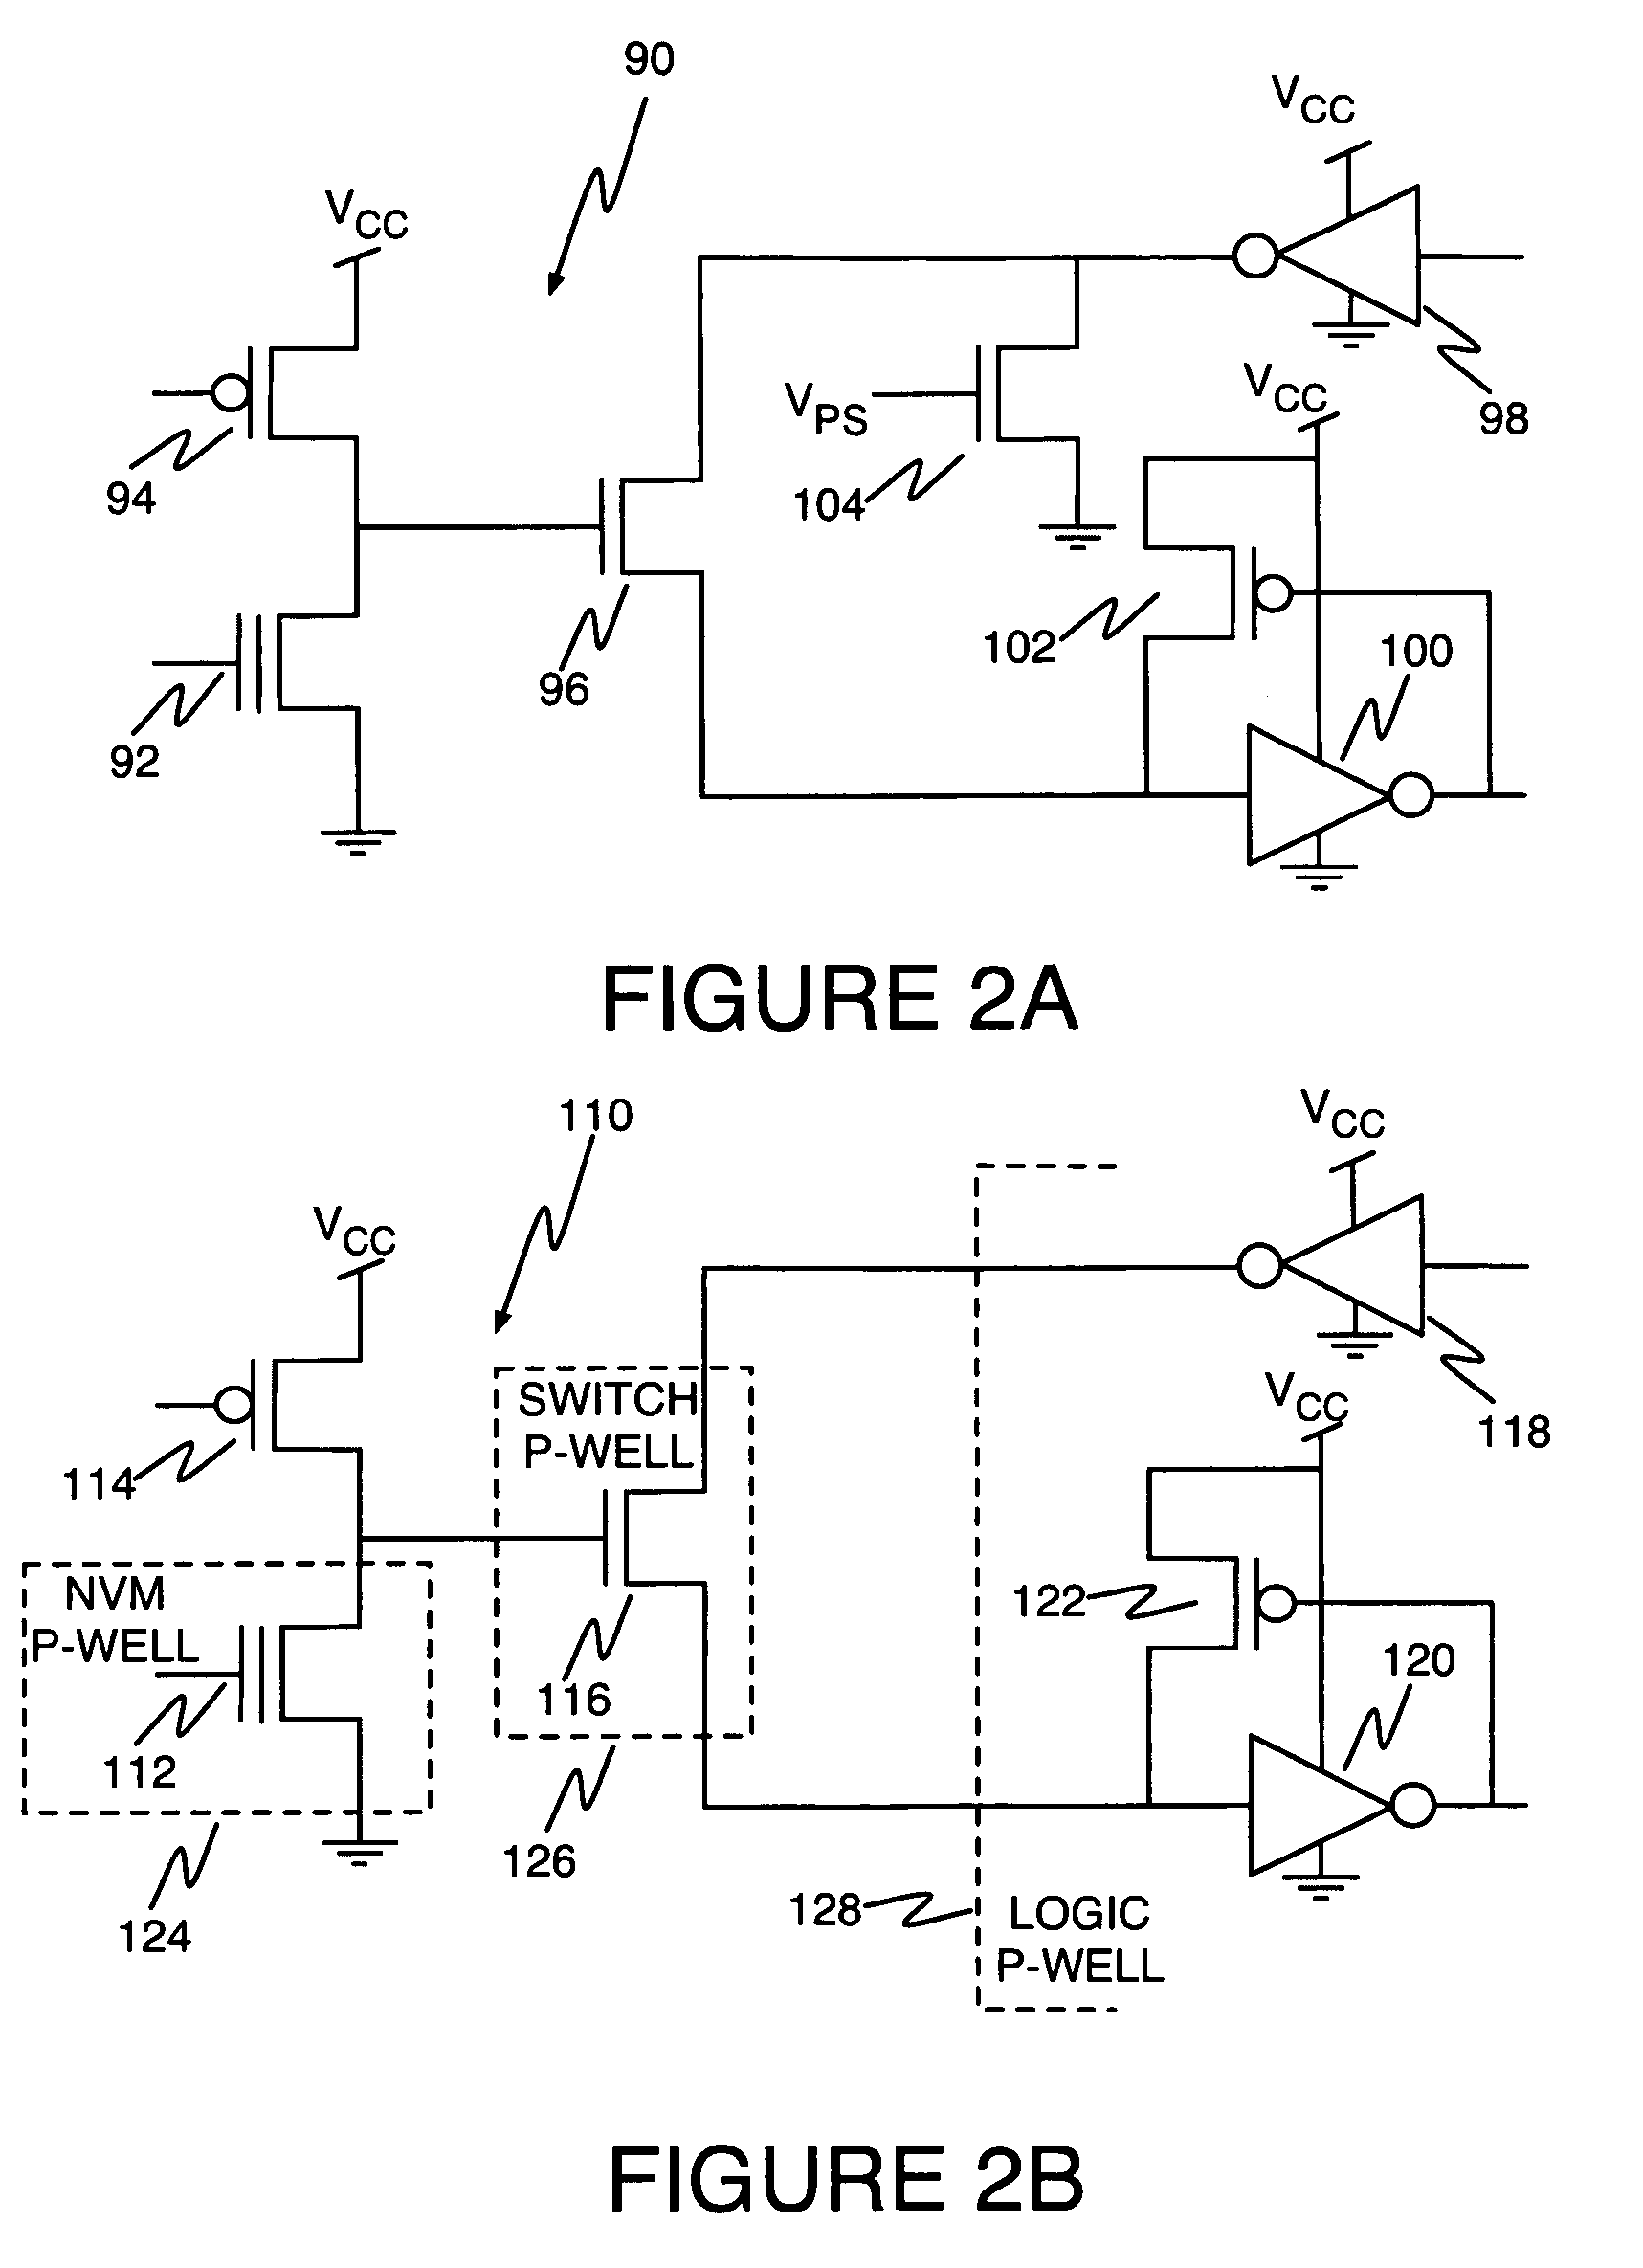 Non-volatile programmable memory cell and array for programmable logic array